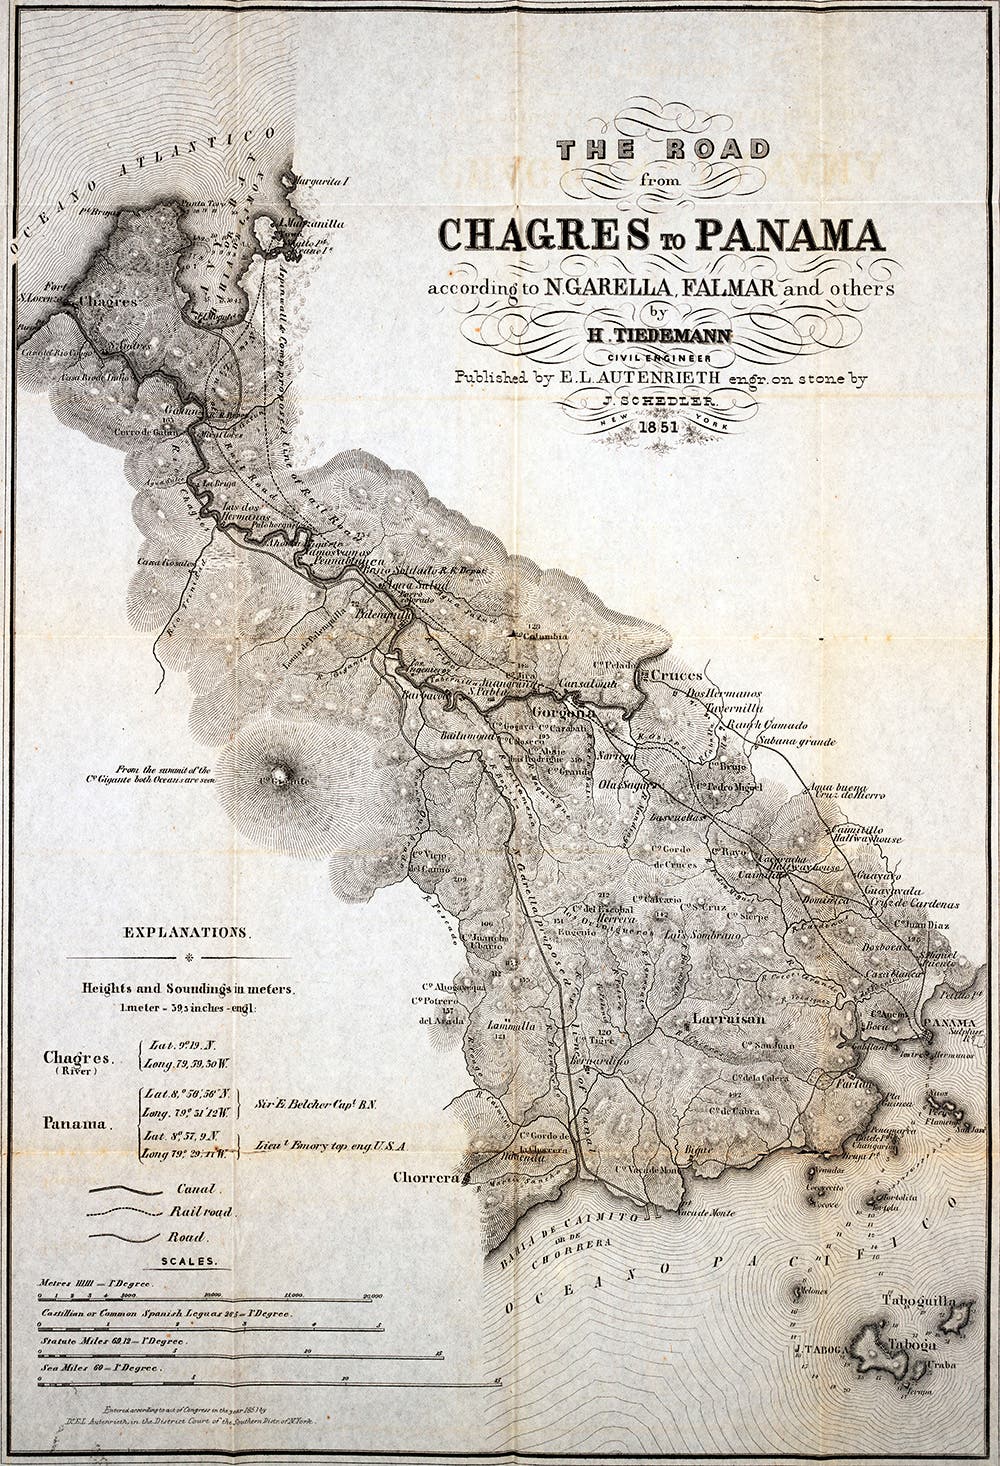 A route to cross Panama by canoe and mule path, before the railroad. From E.L. Autenrieth. A topographical map of the Isthmus of Panama. New York, 1851.